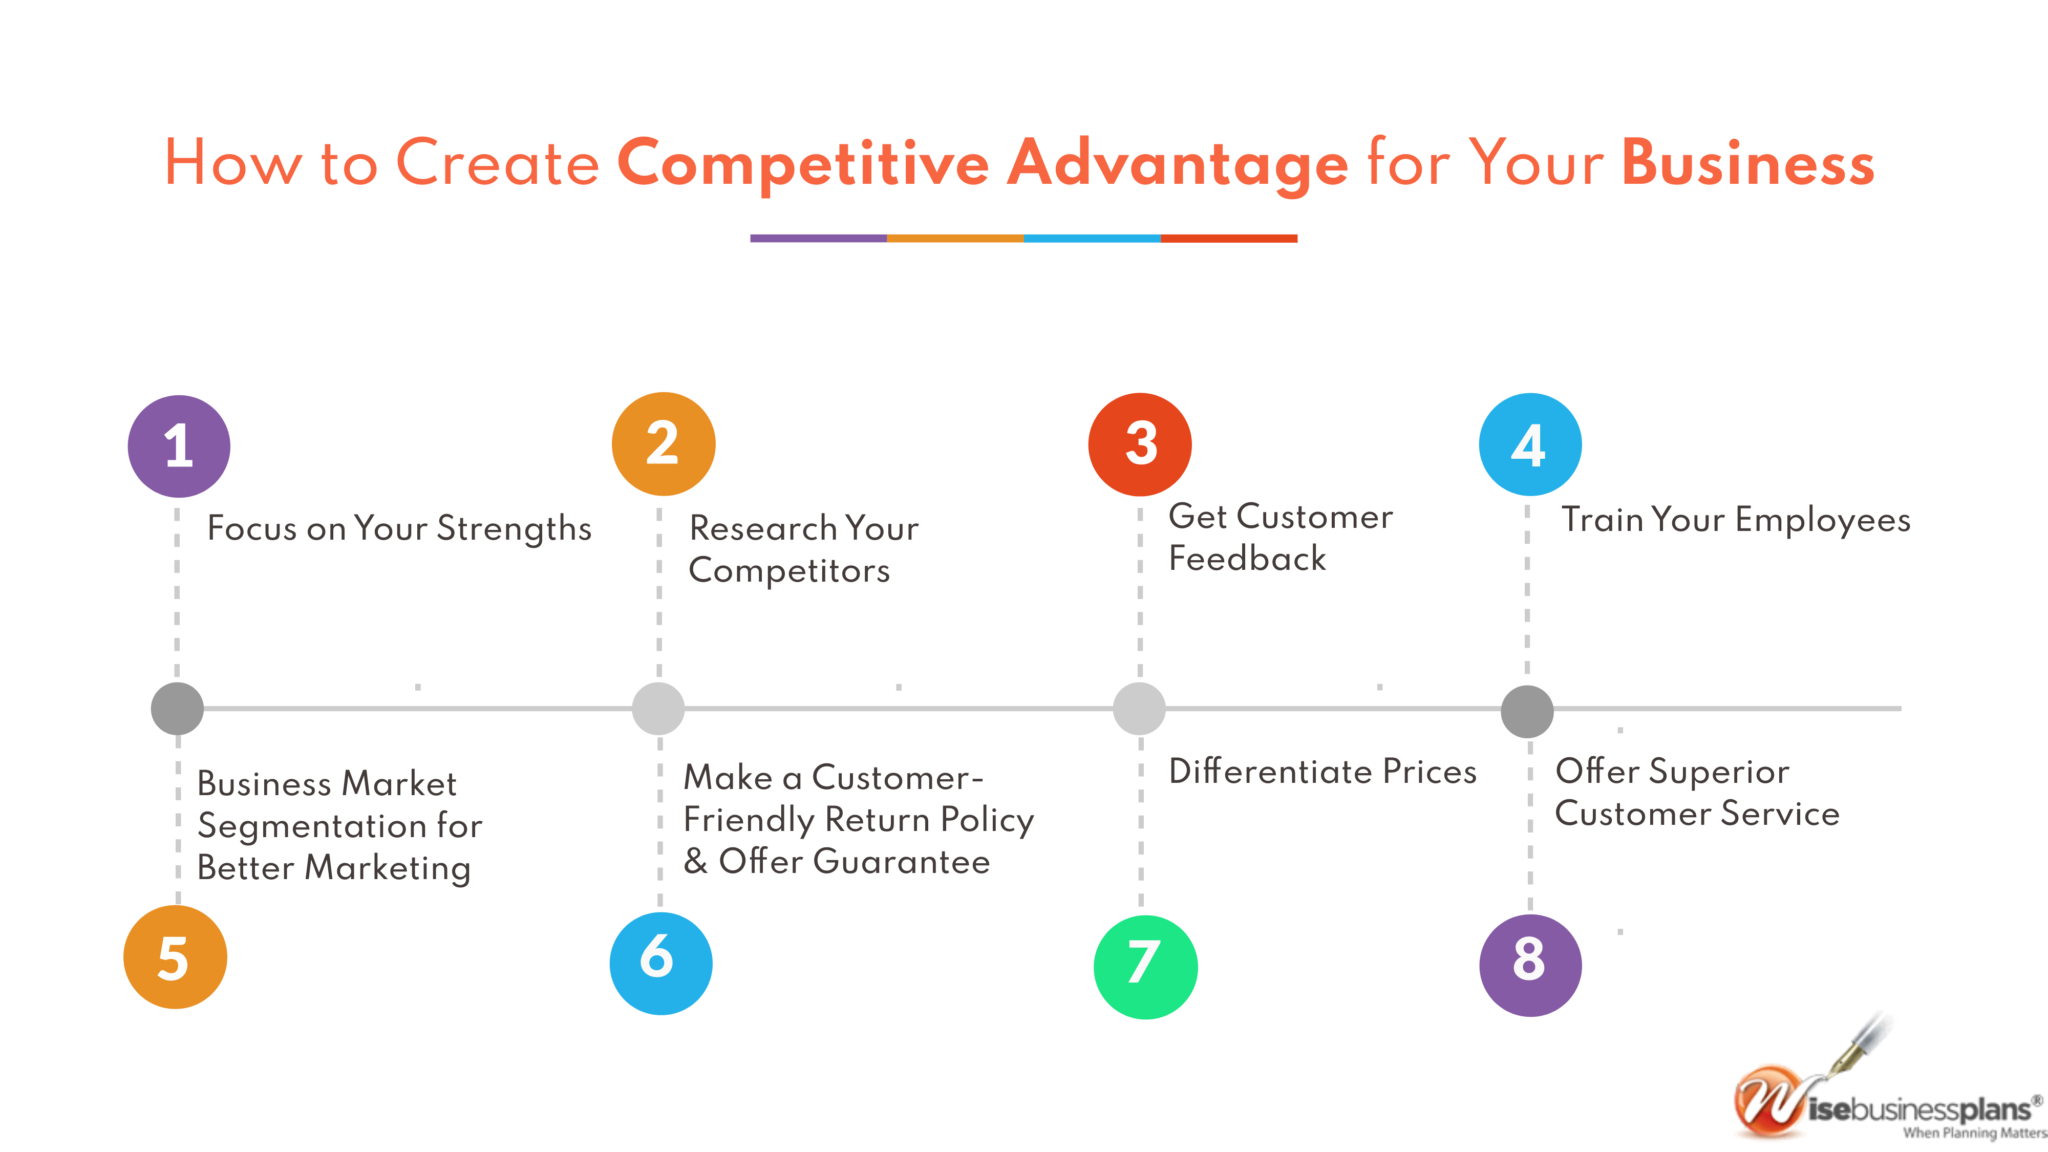 How to Create Competitive Advantage for Your Business